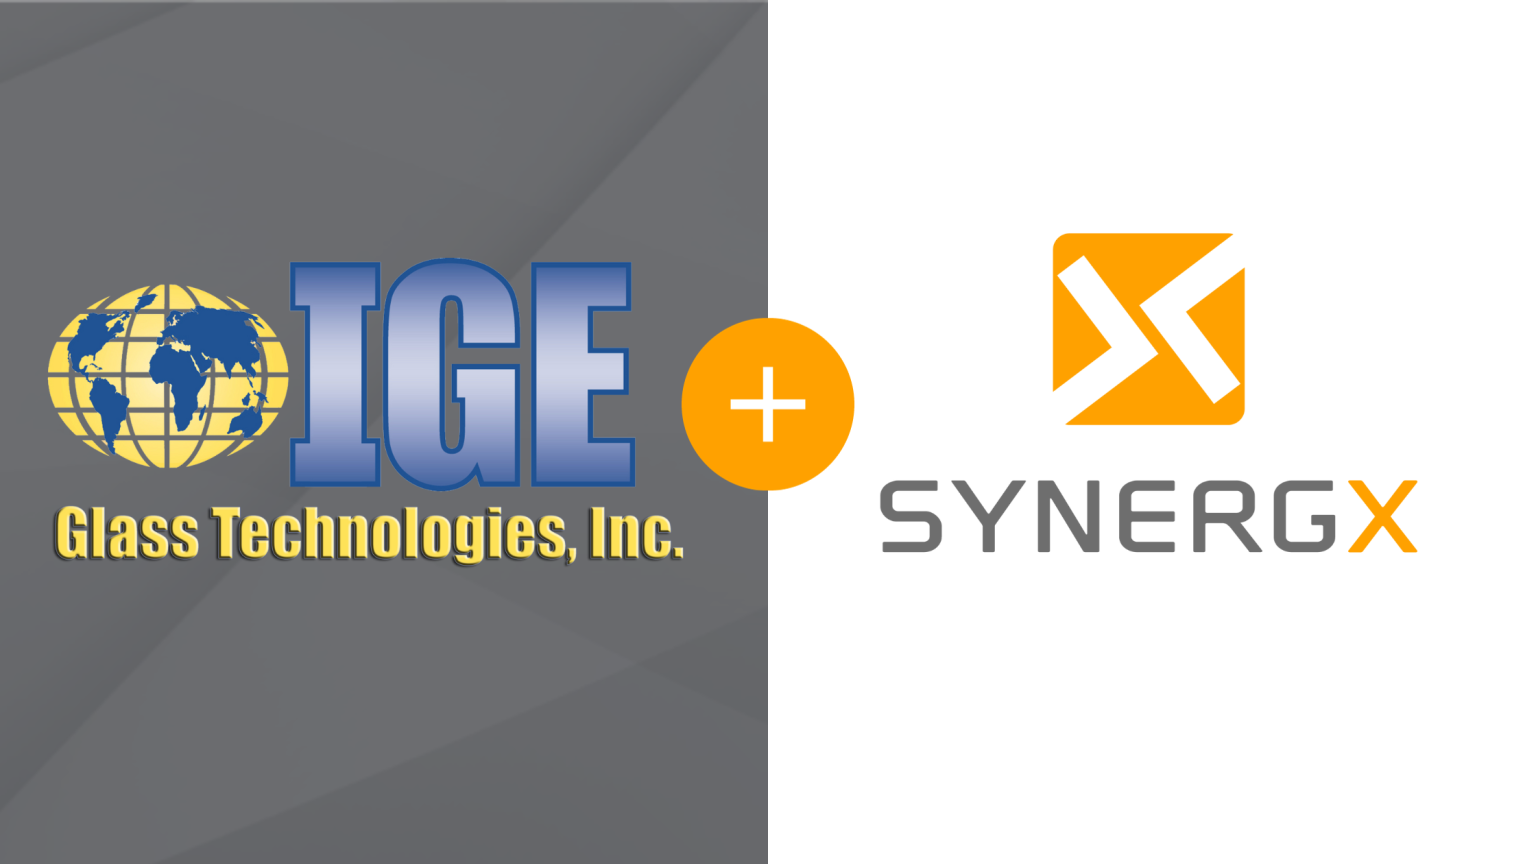 Distribution Agreement Signed between IGE Glass Technologies and SYNERGX for Glass Inspection Products.